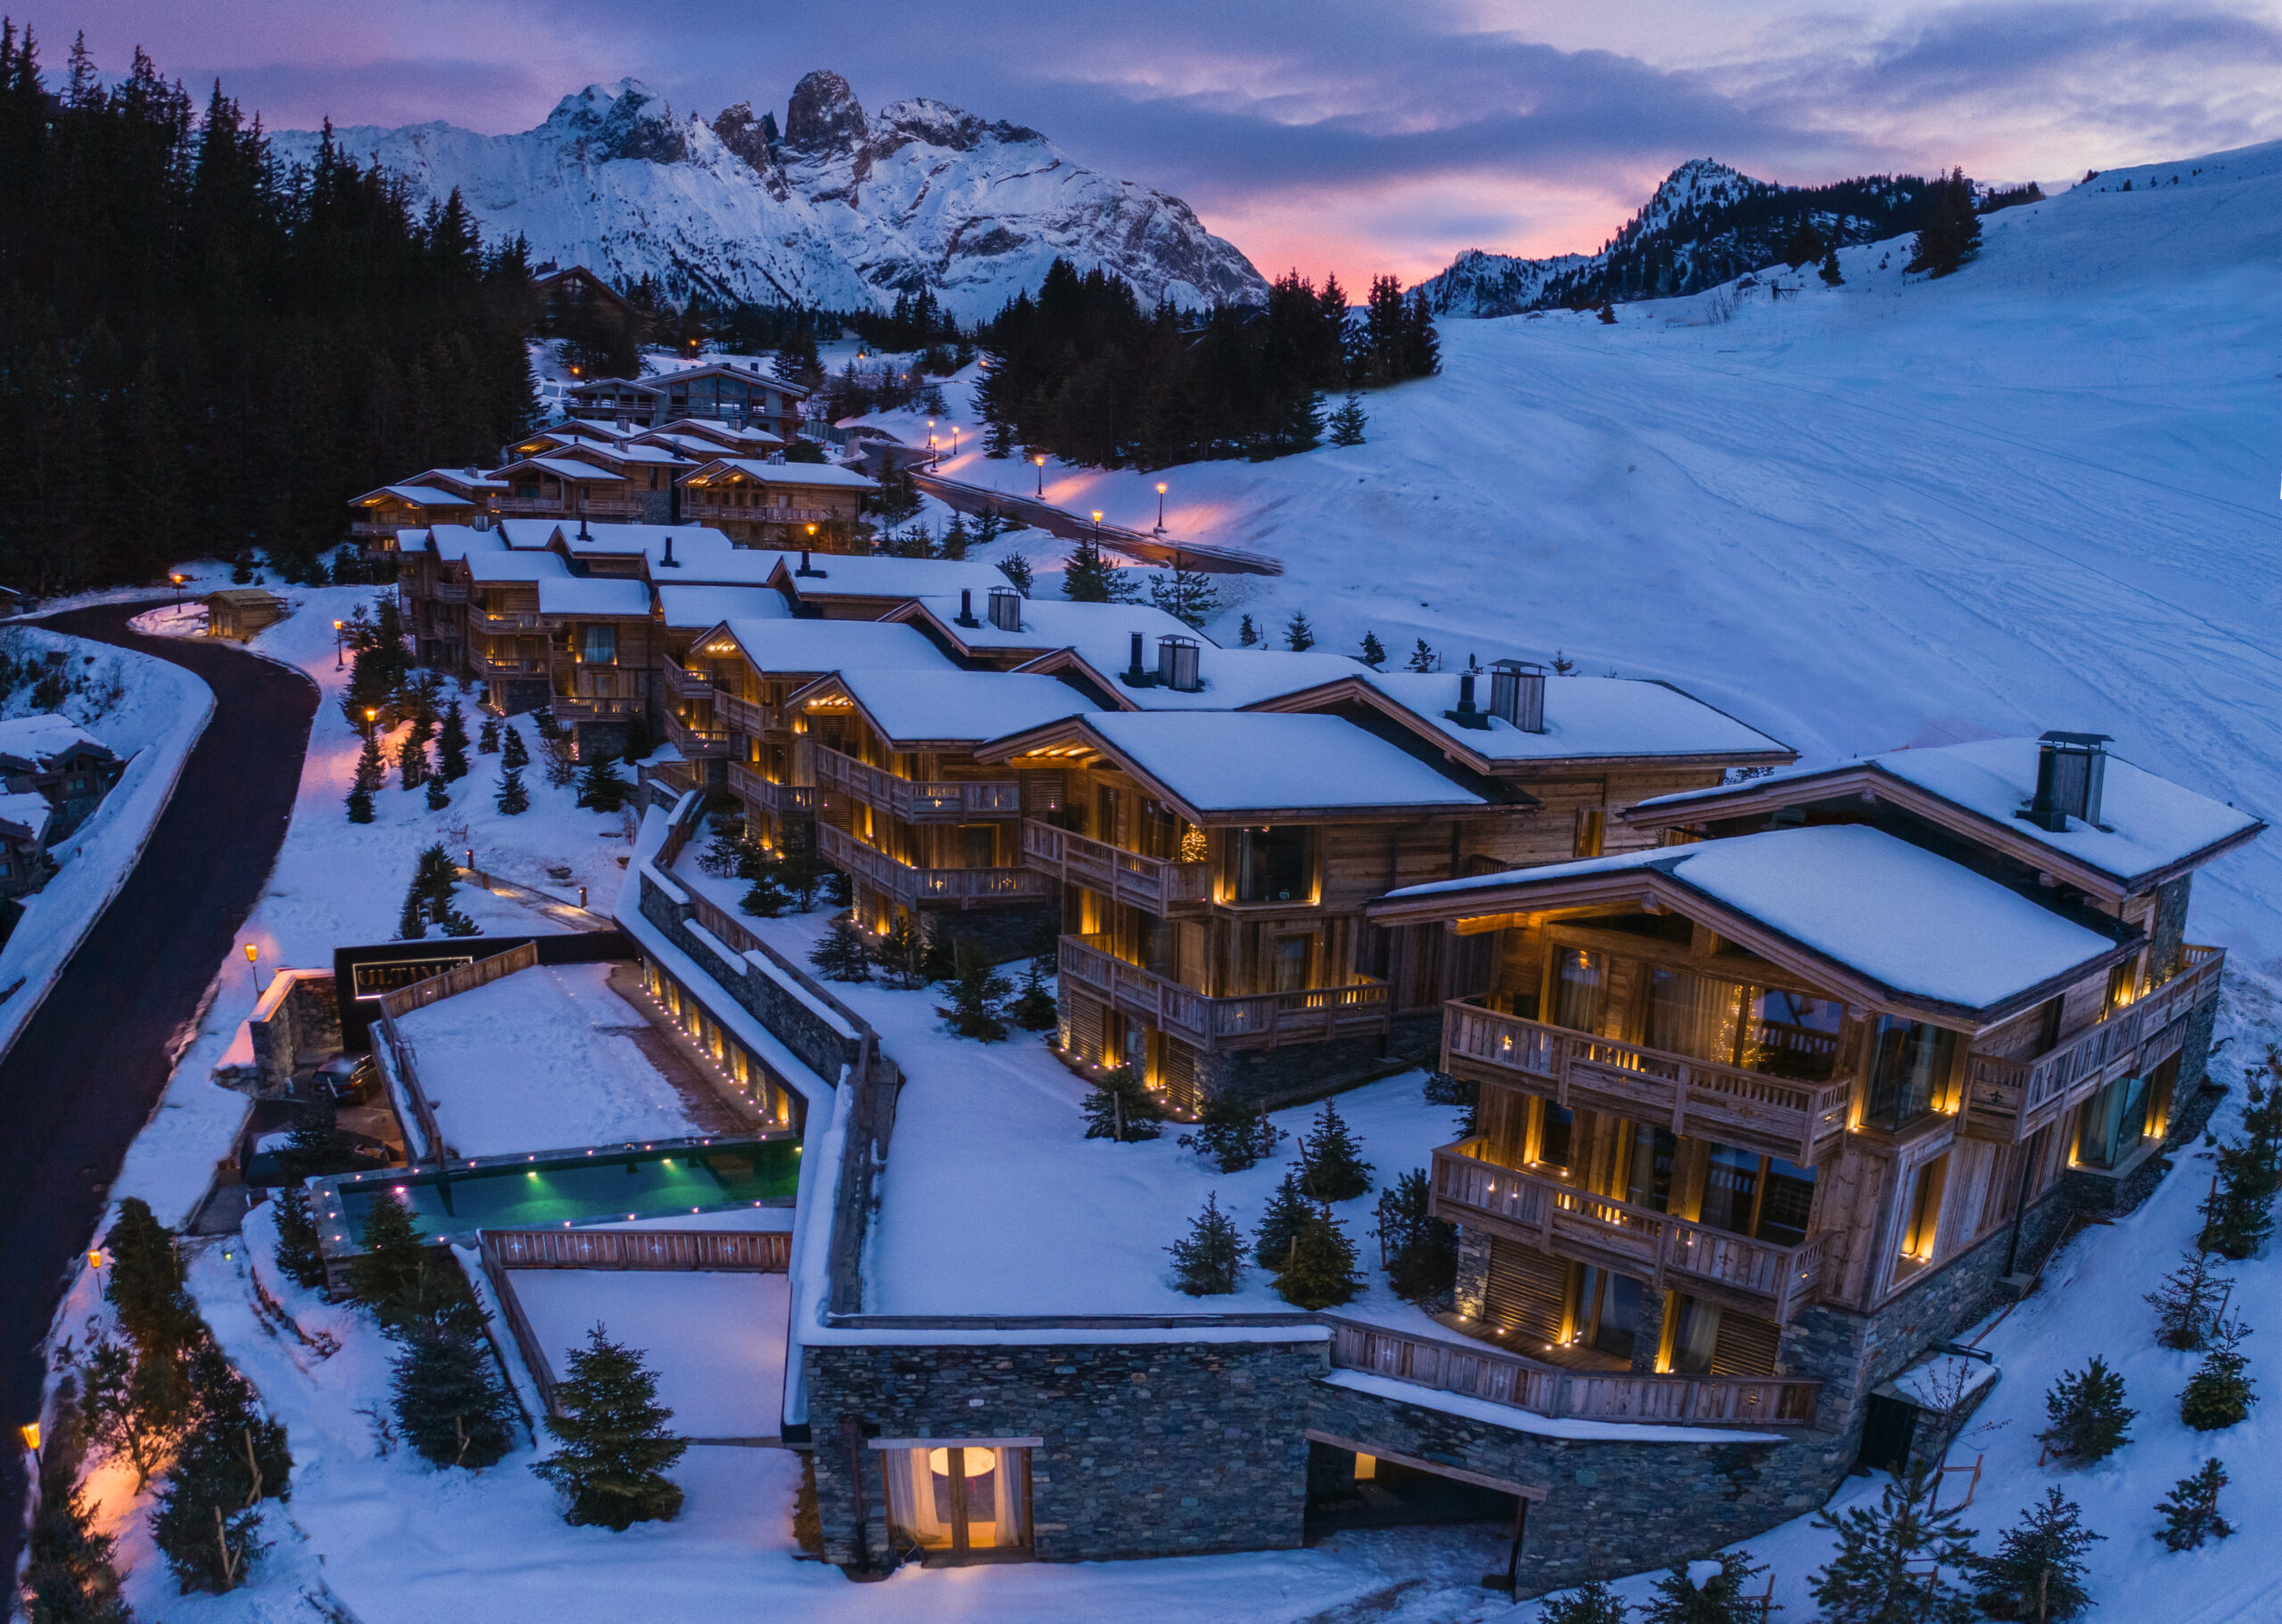 Prada Opens a New Store in Courchevel, France